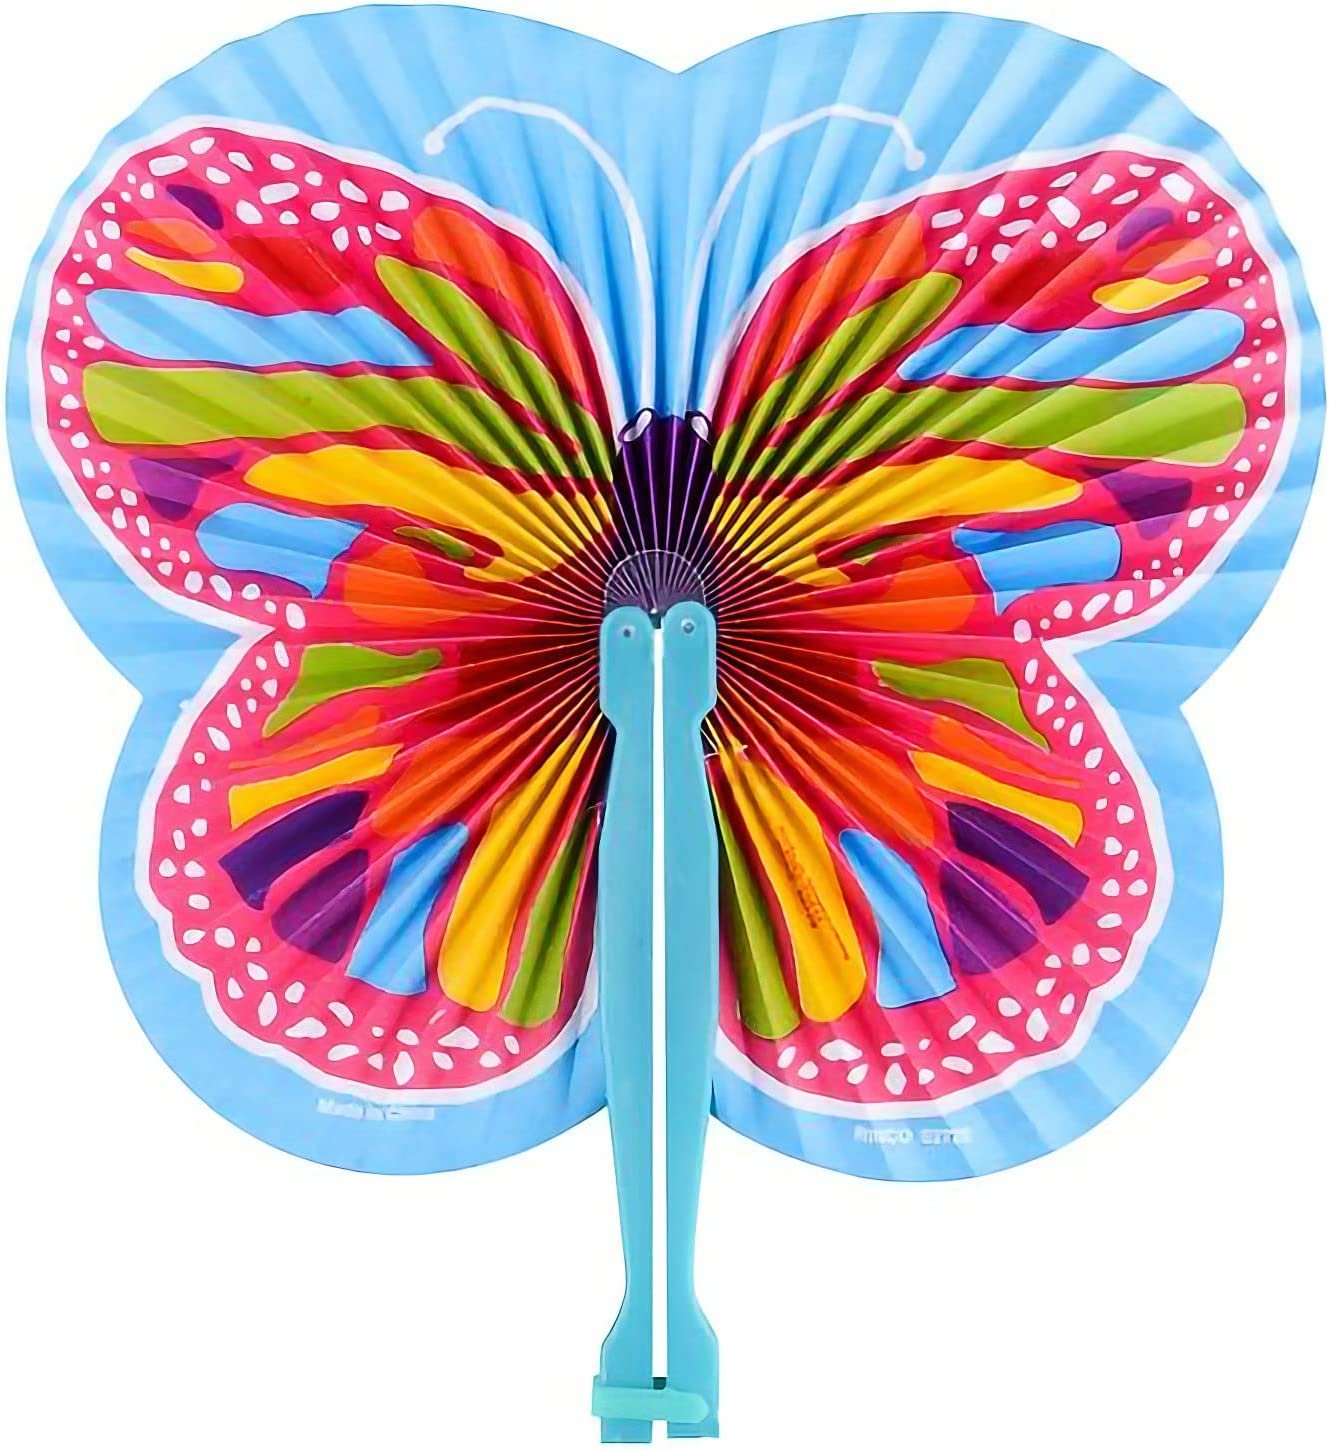 9.5" Handheld Butterfly Folding Fans - Pack of 12 Foldable Fans in Assorted Colors and Designs, Goodie Bag Filler, Party Favors and Supplies, Fun Novelties and Gifts for Kids Ages 3+